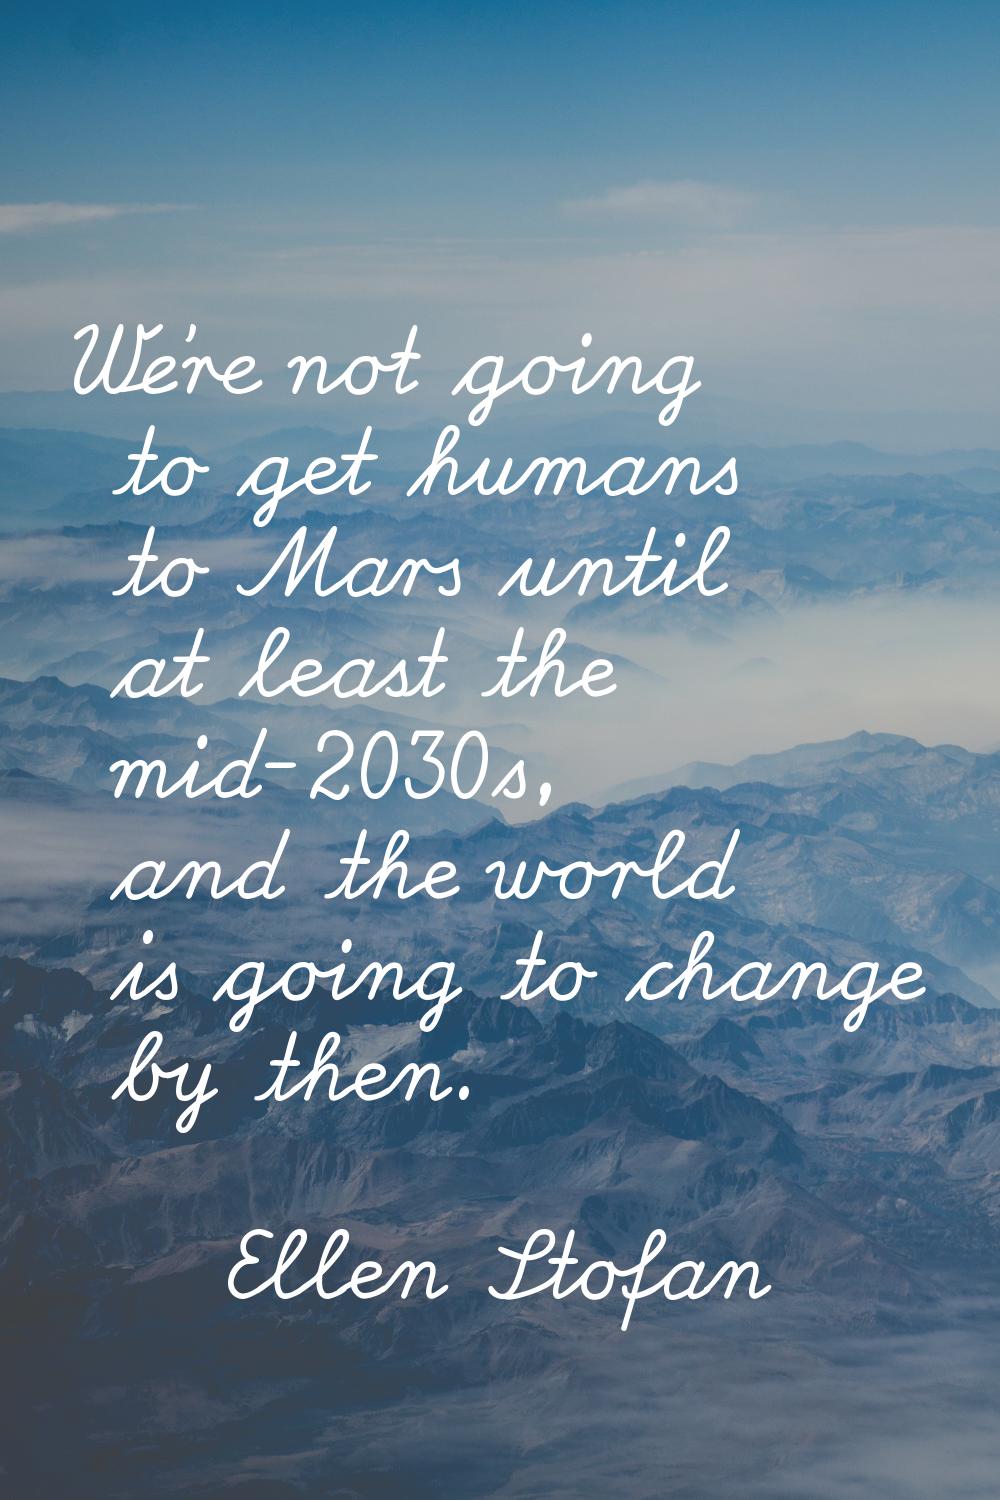 We're not going to get humans to Mars until at least the mid-2030s, and the world is going to chang